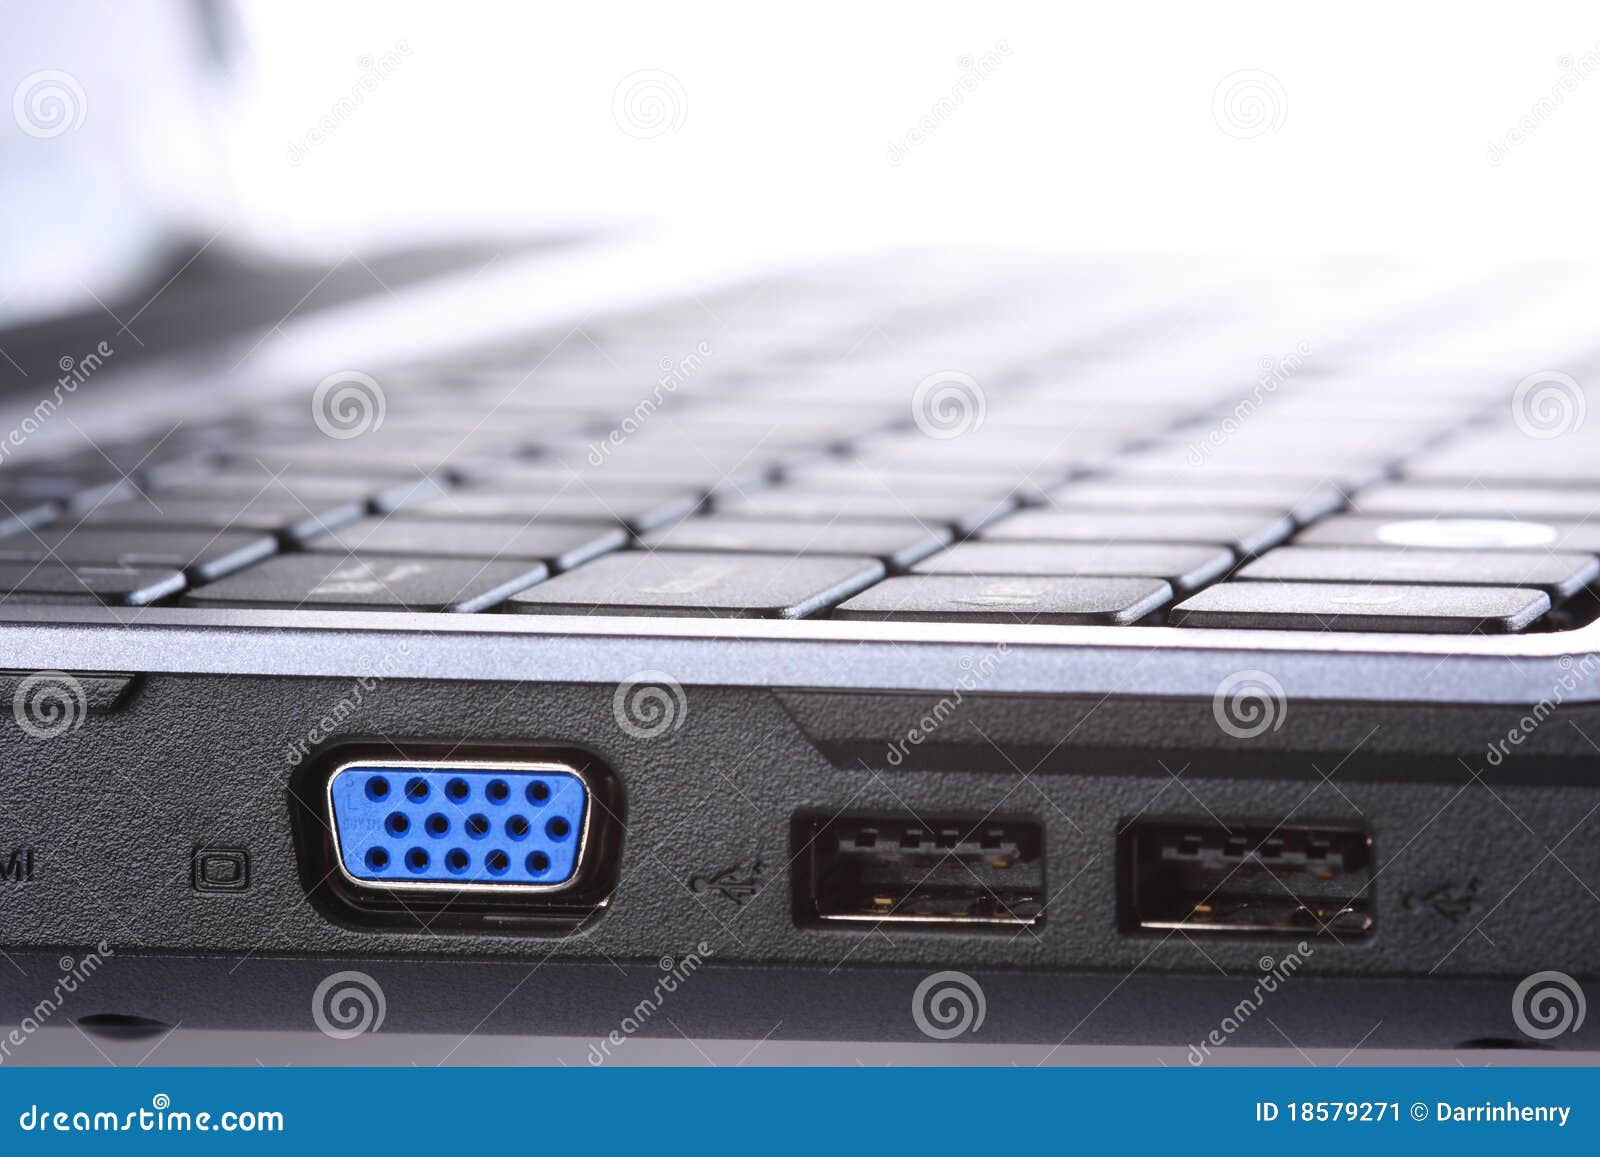 Vga And Usb Ports On Side Of Laptop Computer Stock Image